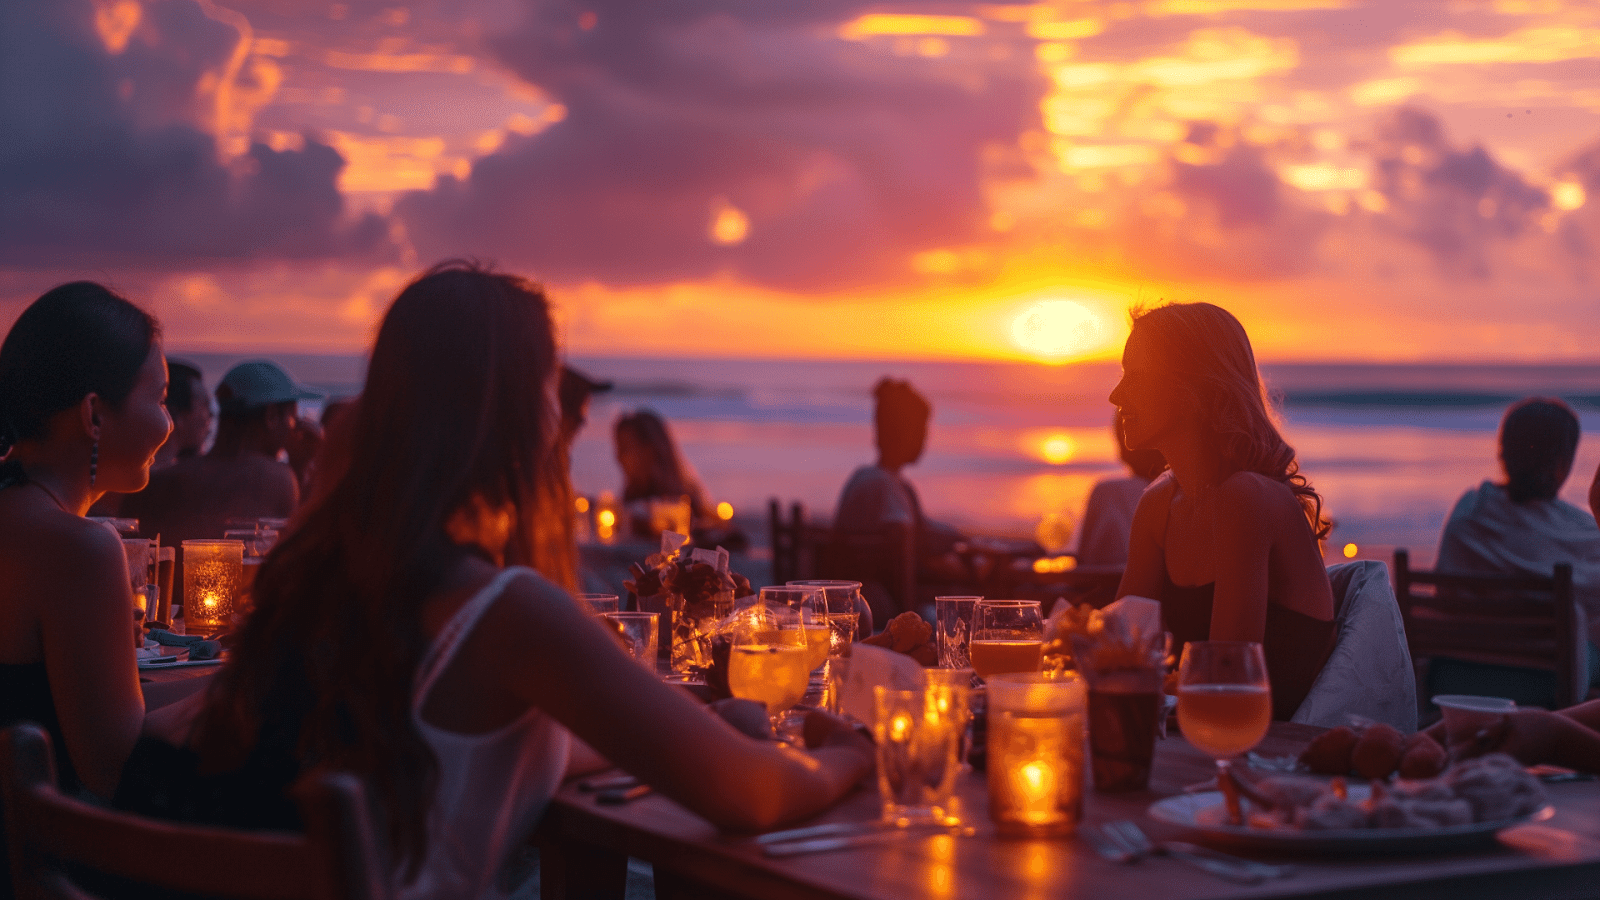 Diners watch the sun dip into the sea at a Bali beachfront restaurant